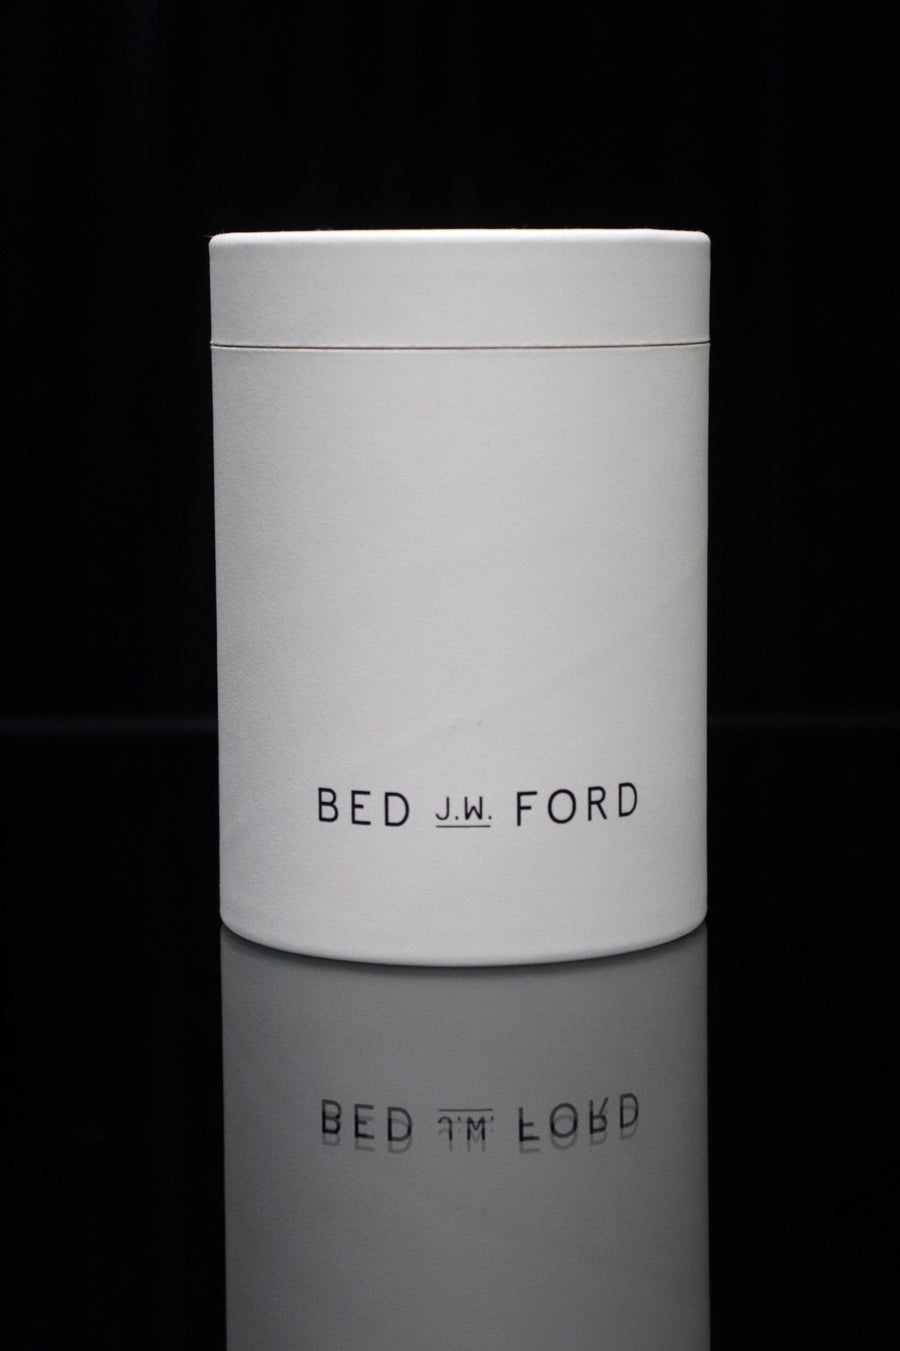 BED j.w. FORD  Fragrance 002.